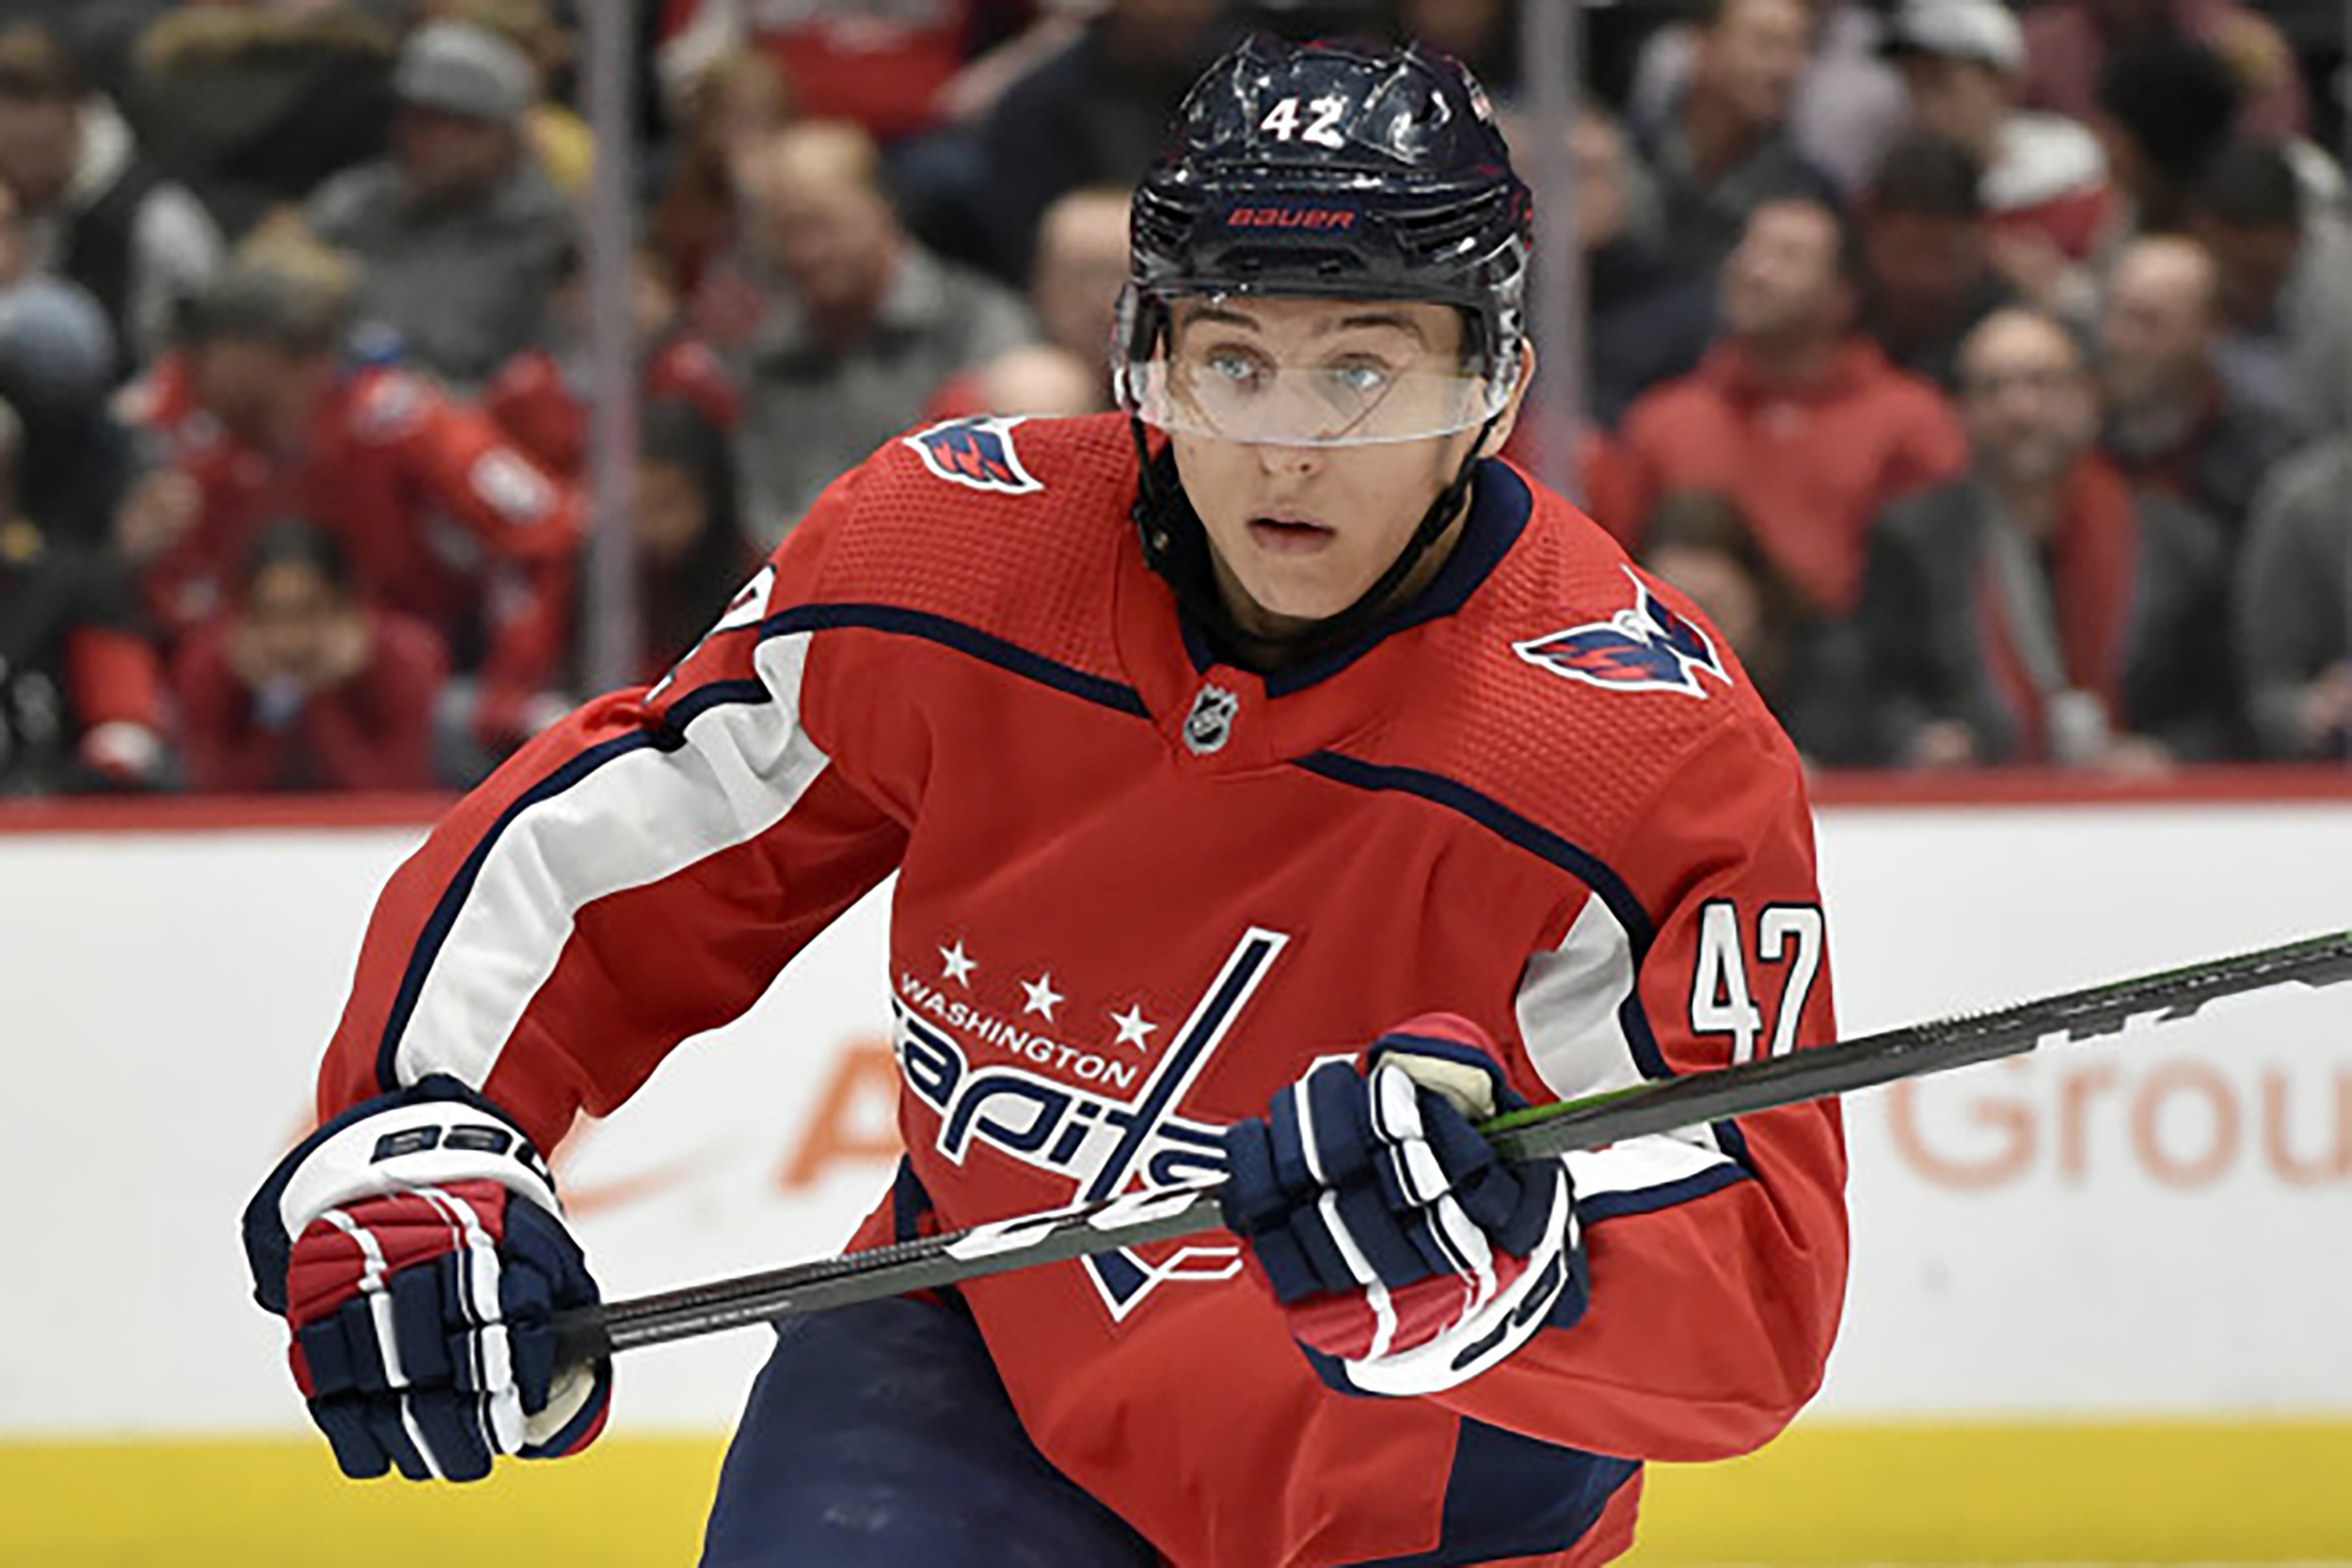 The Washington Capitals expect Martin Fehervary to make the NHL jump in 2021-22